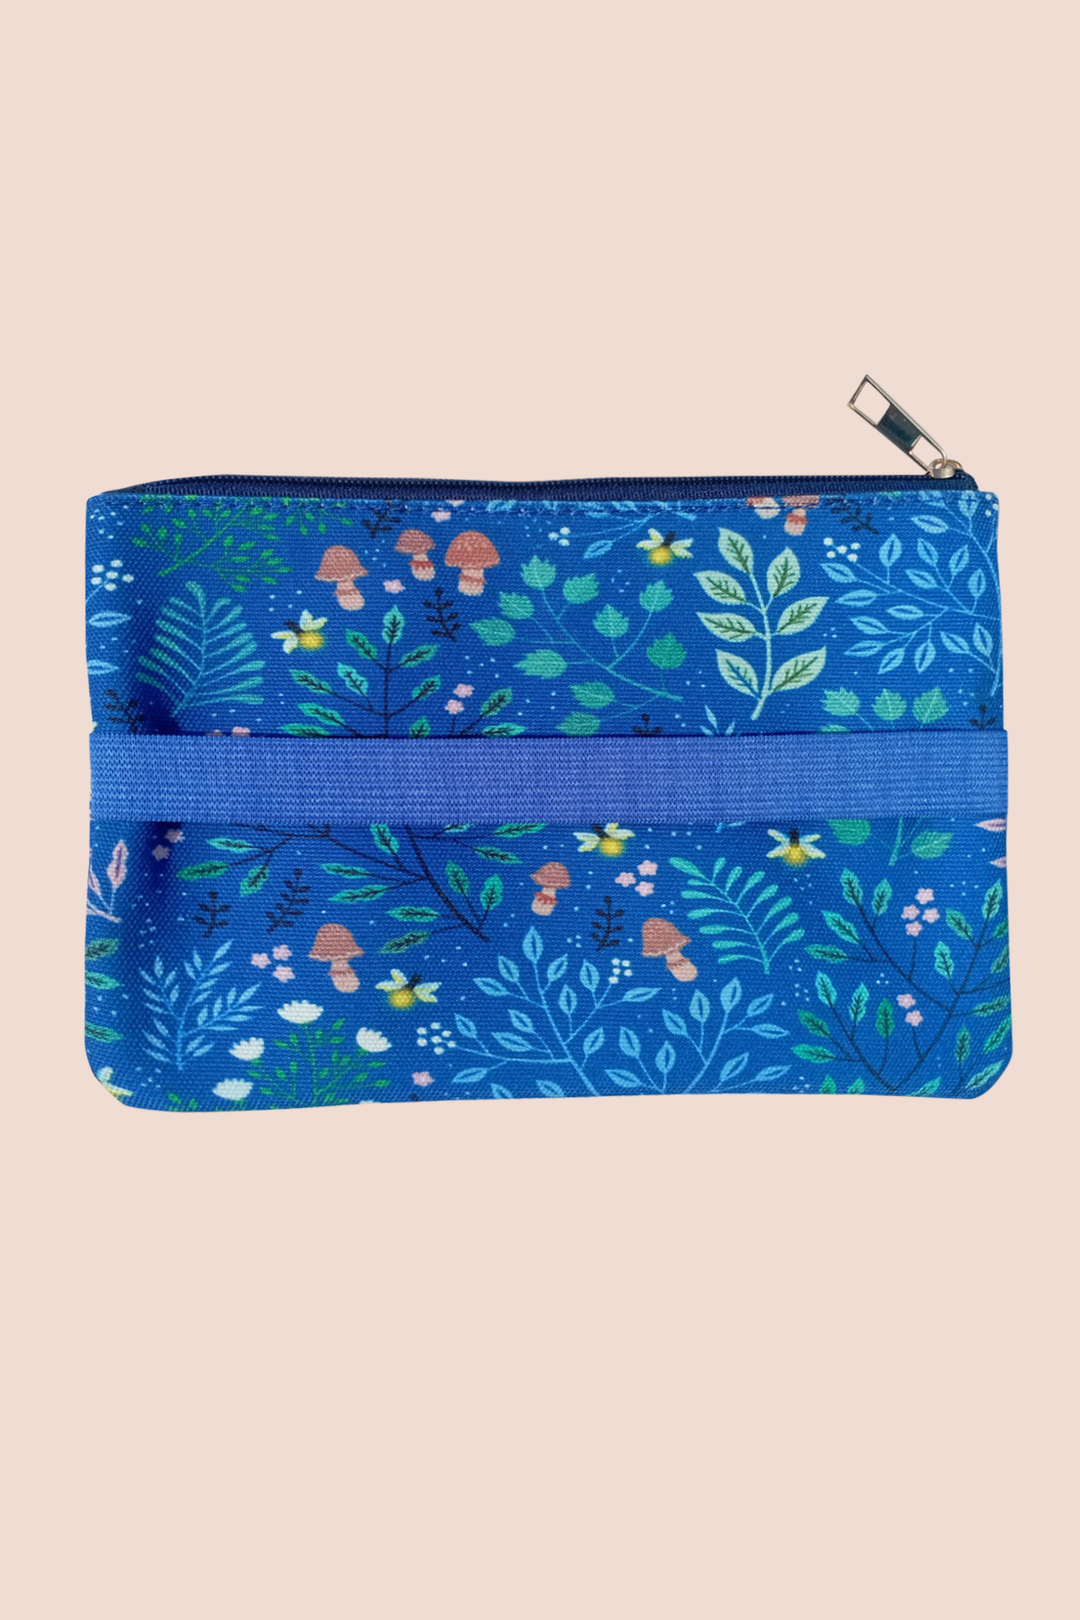 Midnight Blue Pencil Pouch